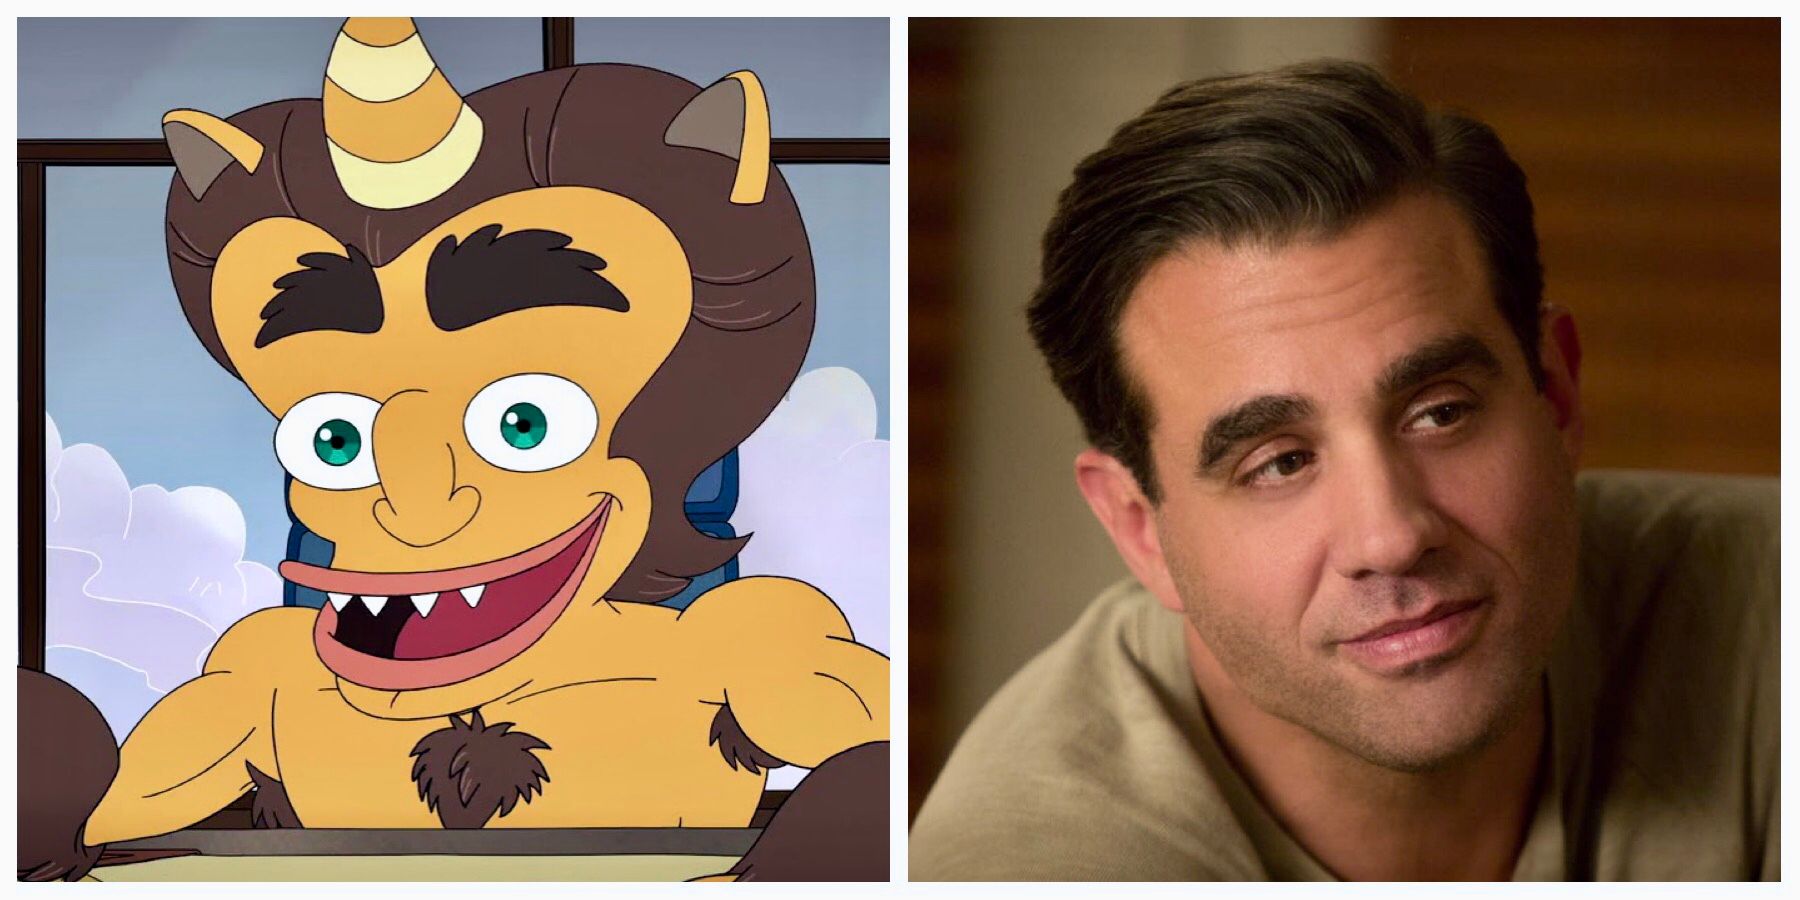 Bobby Cannavale and Big Mouth’s Gavin